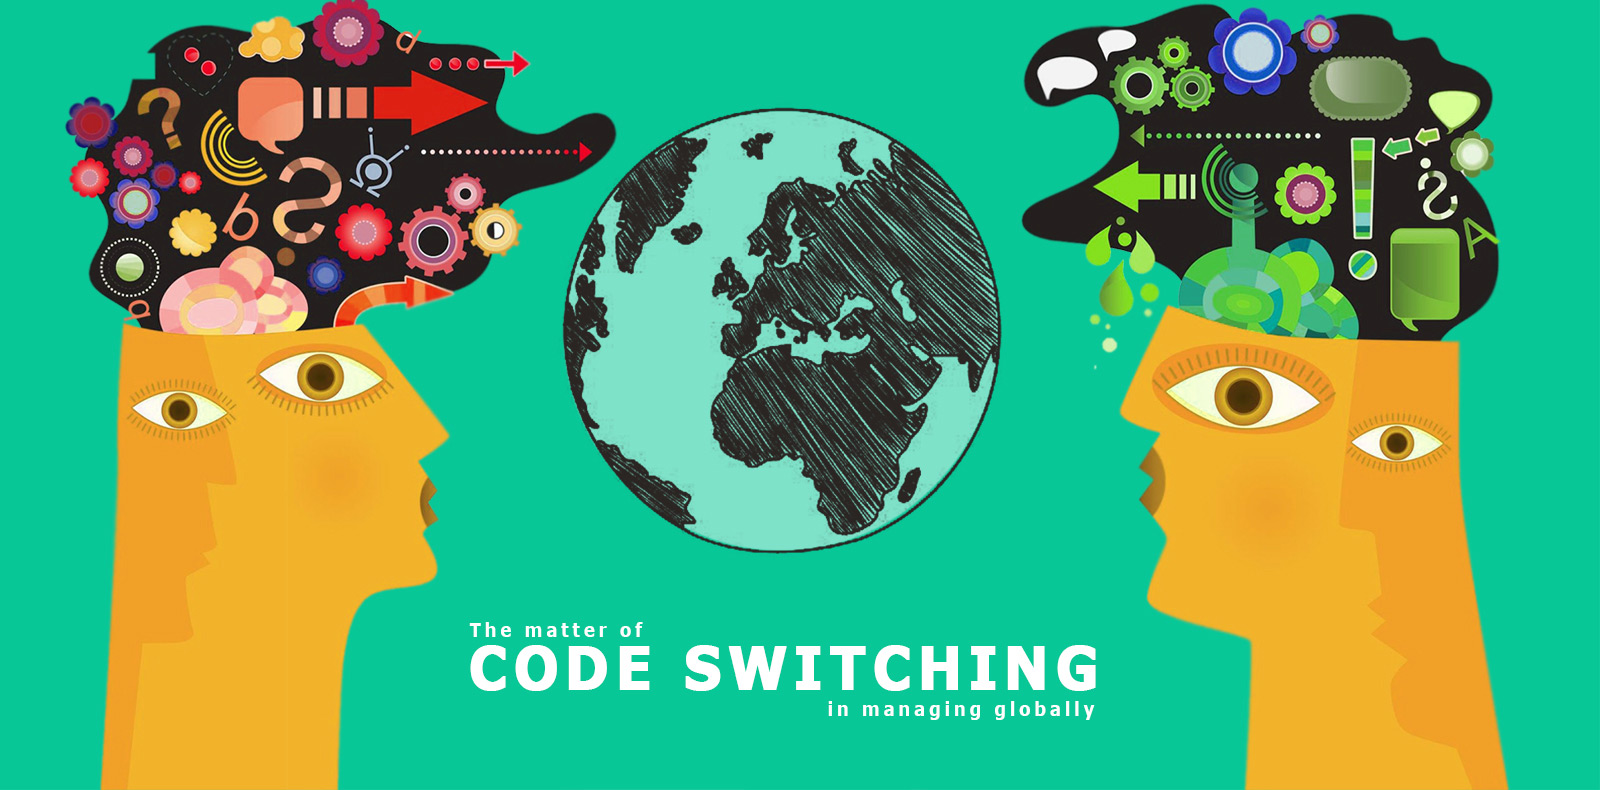 research about code switching